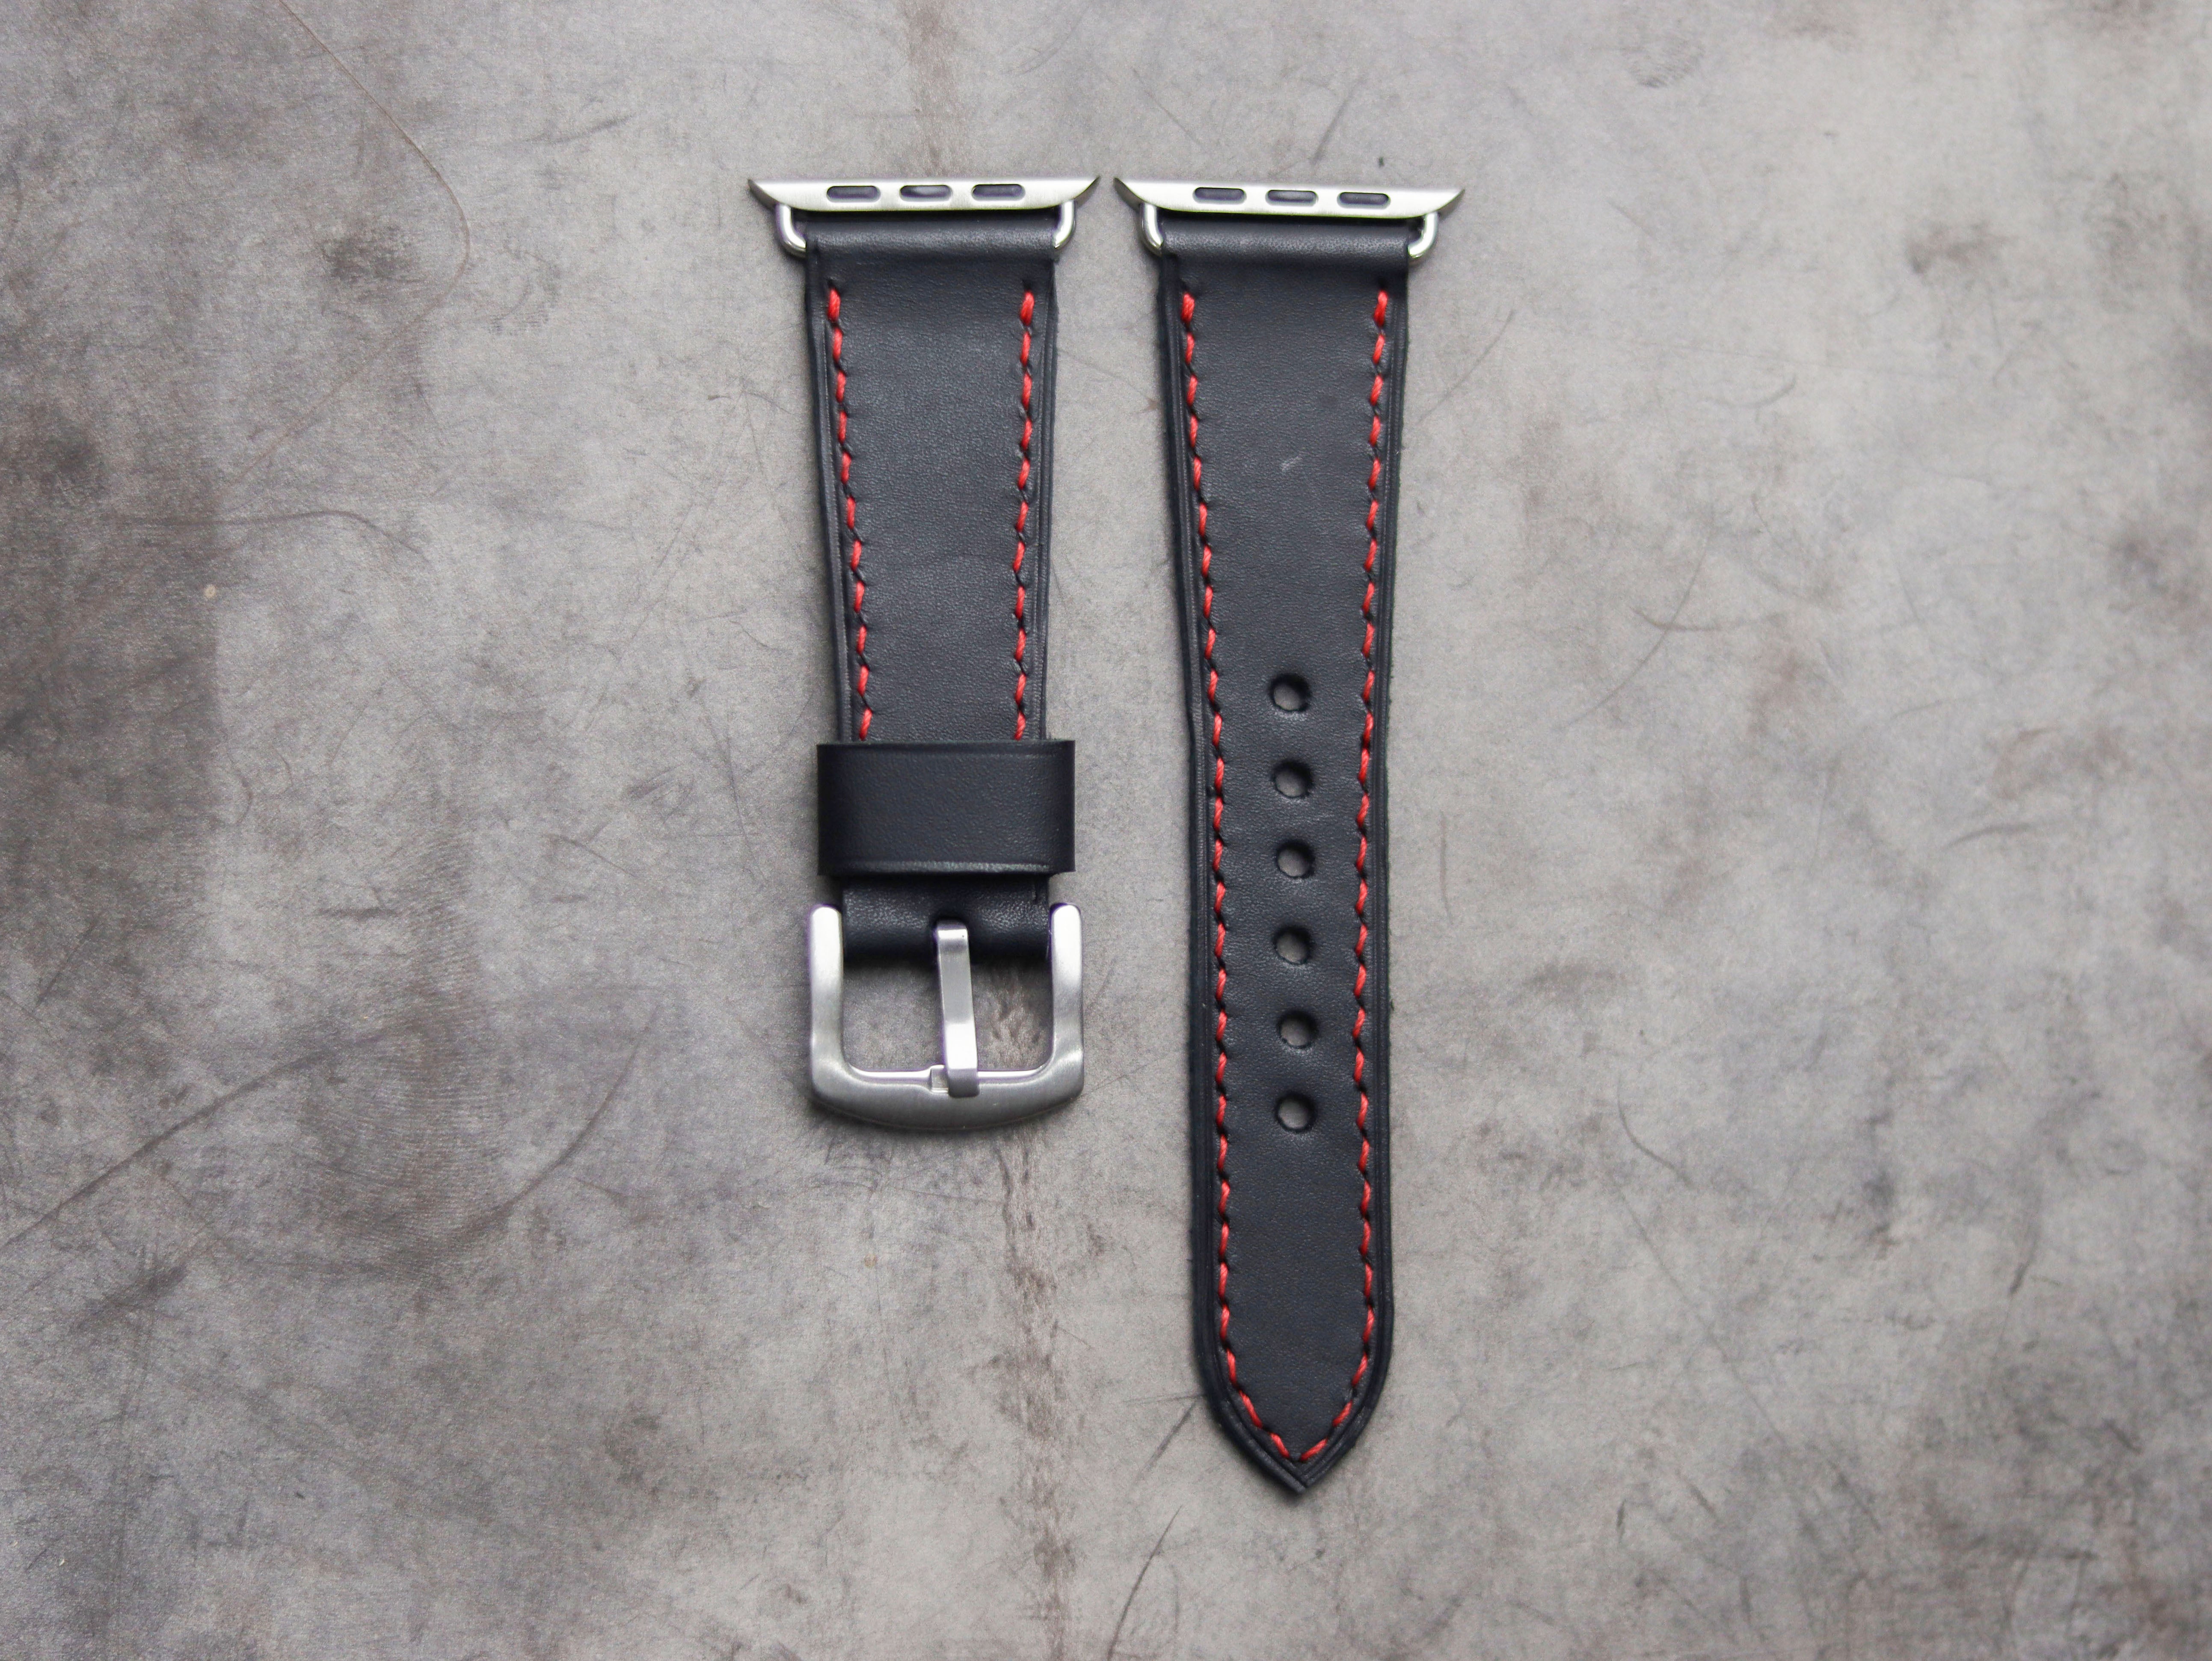 PHANTOM BLACK LEATHER - APPLE WATCH STRAPS HAND-CRAFTED